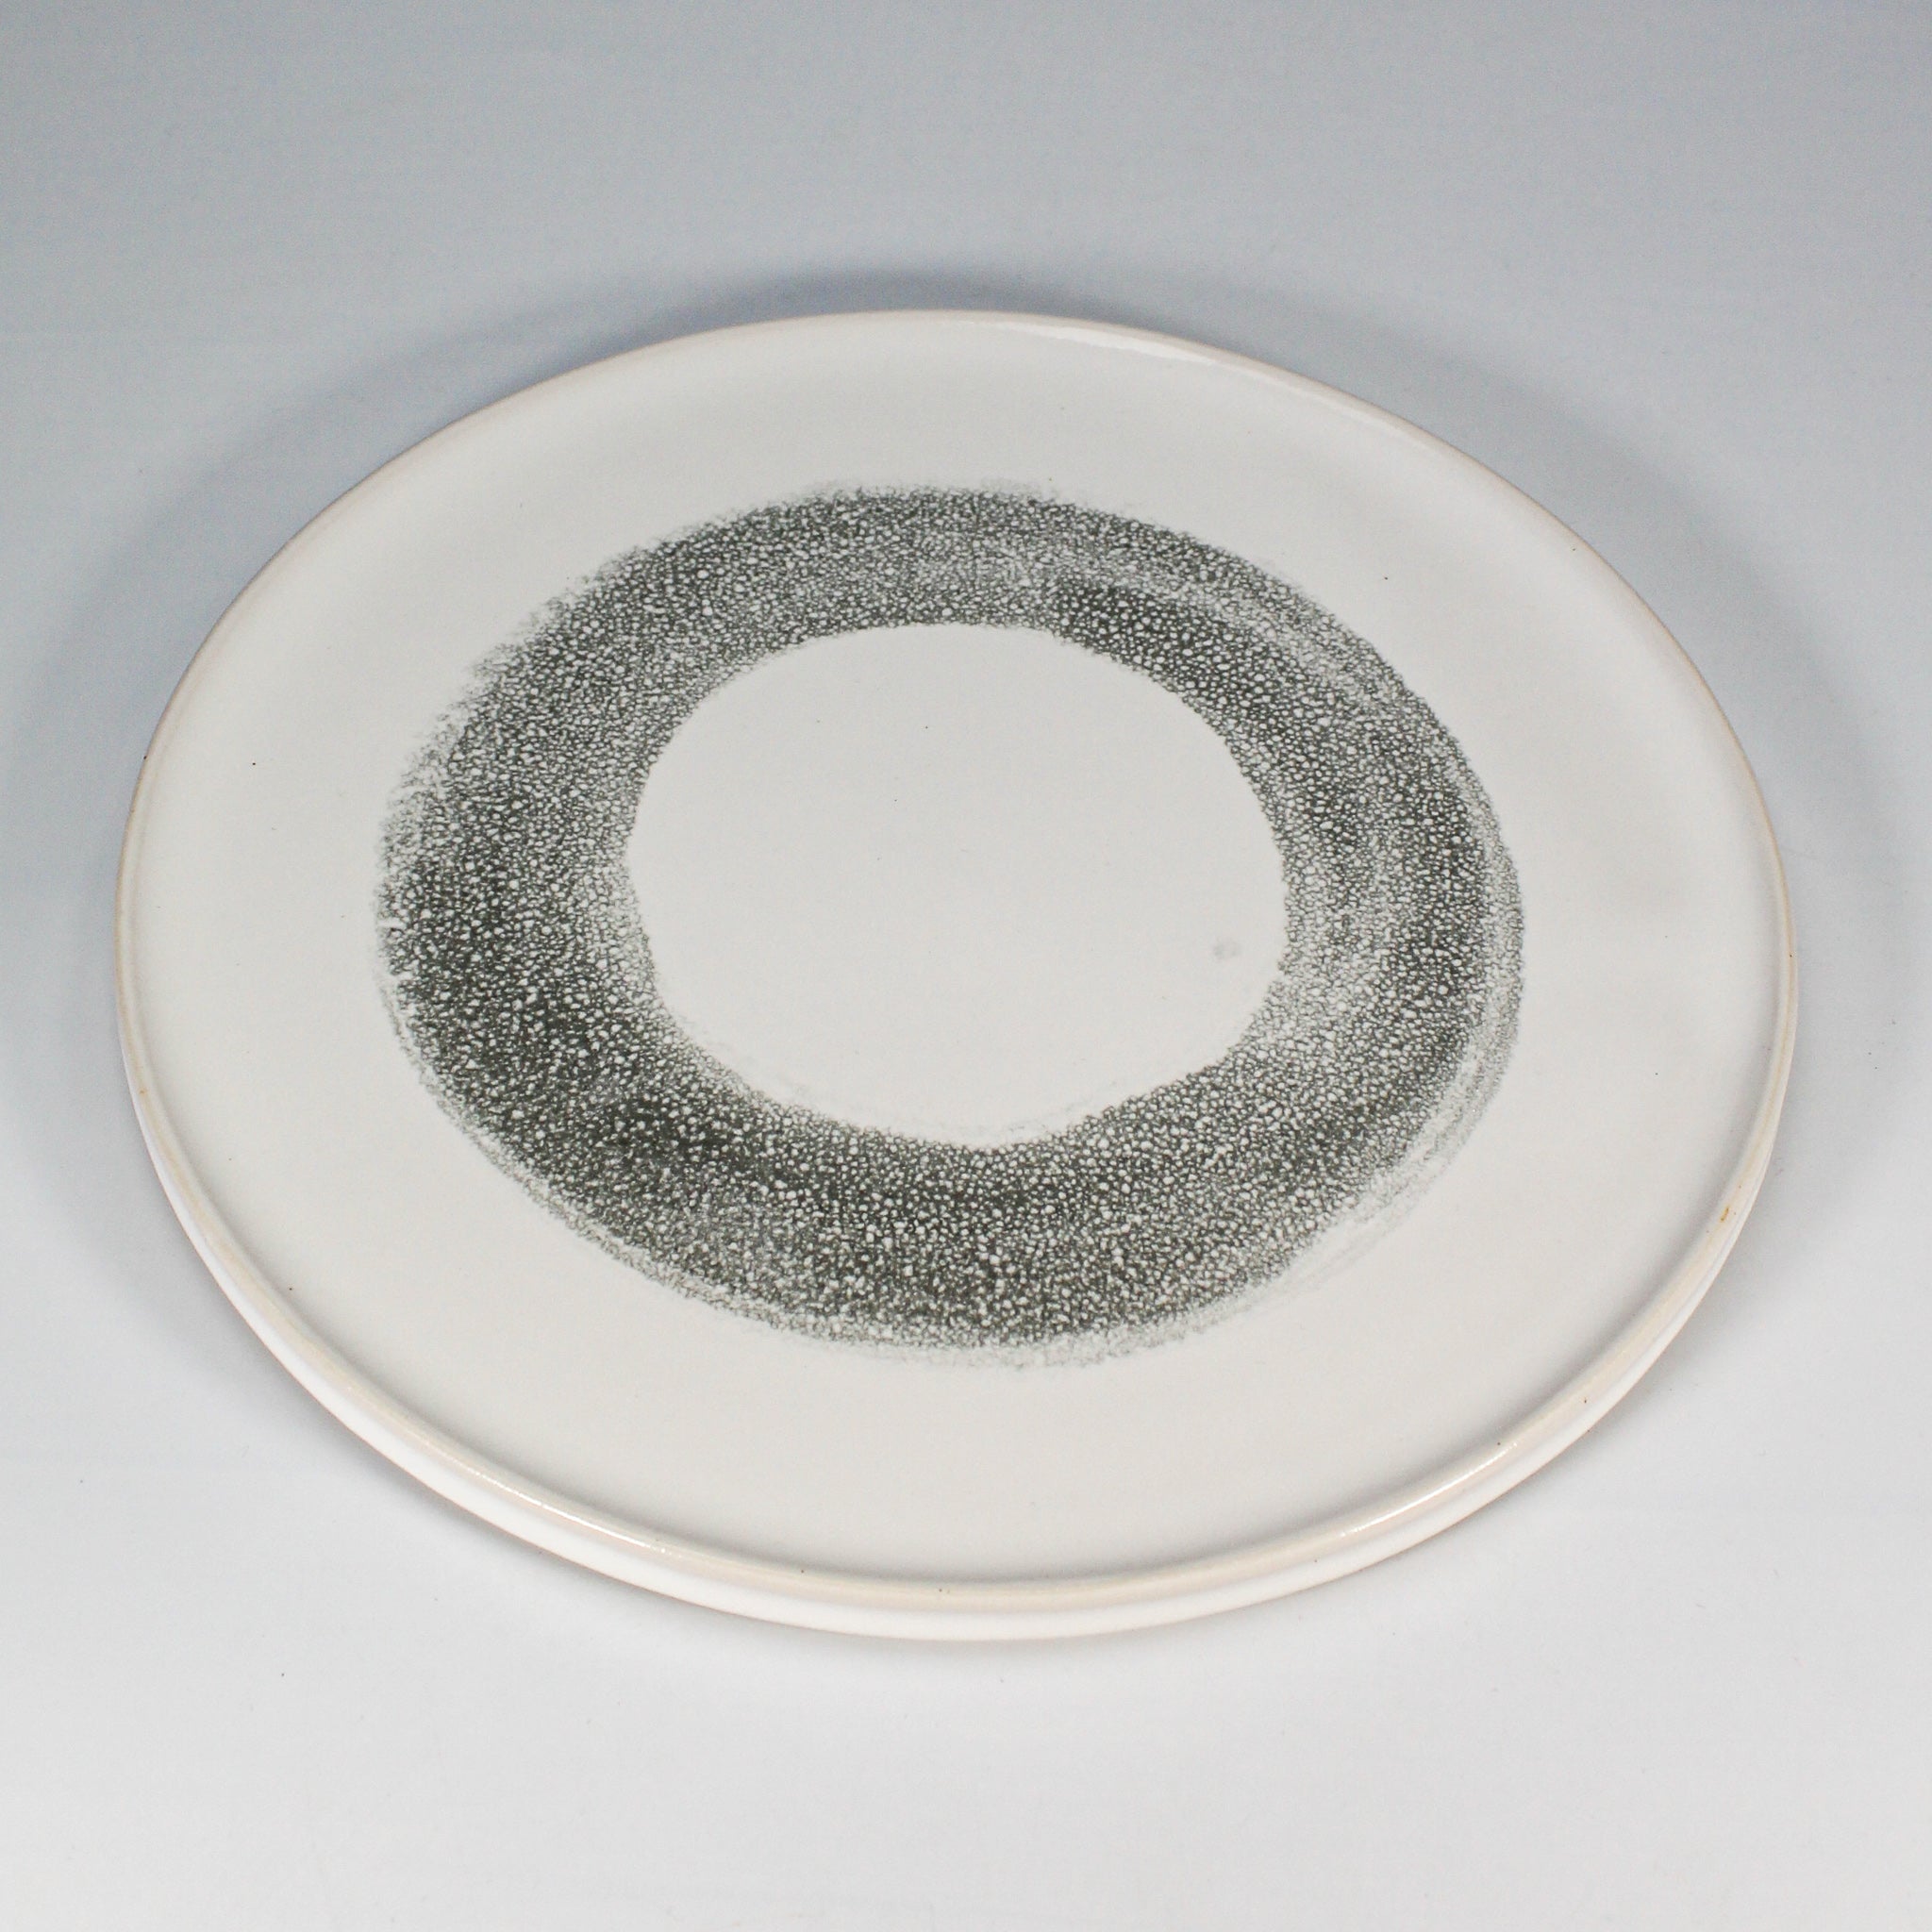 Large grey and white platter